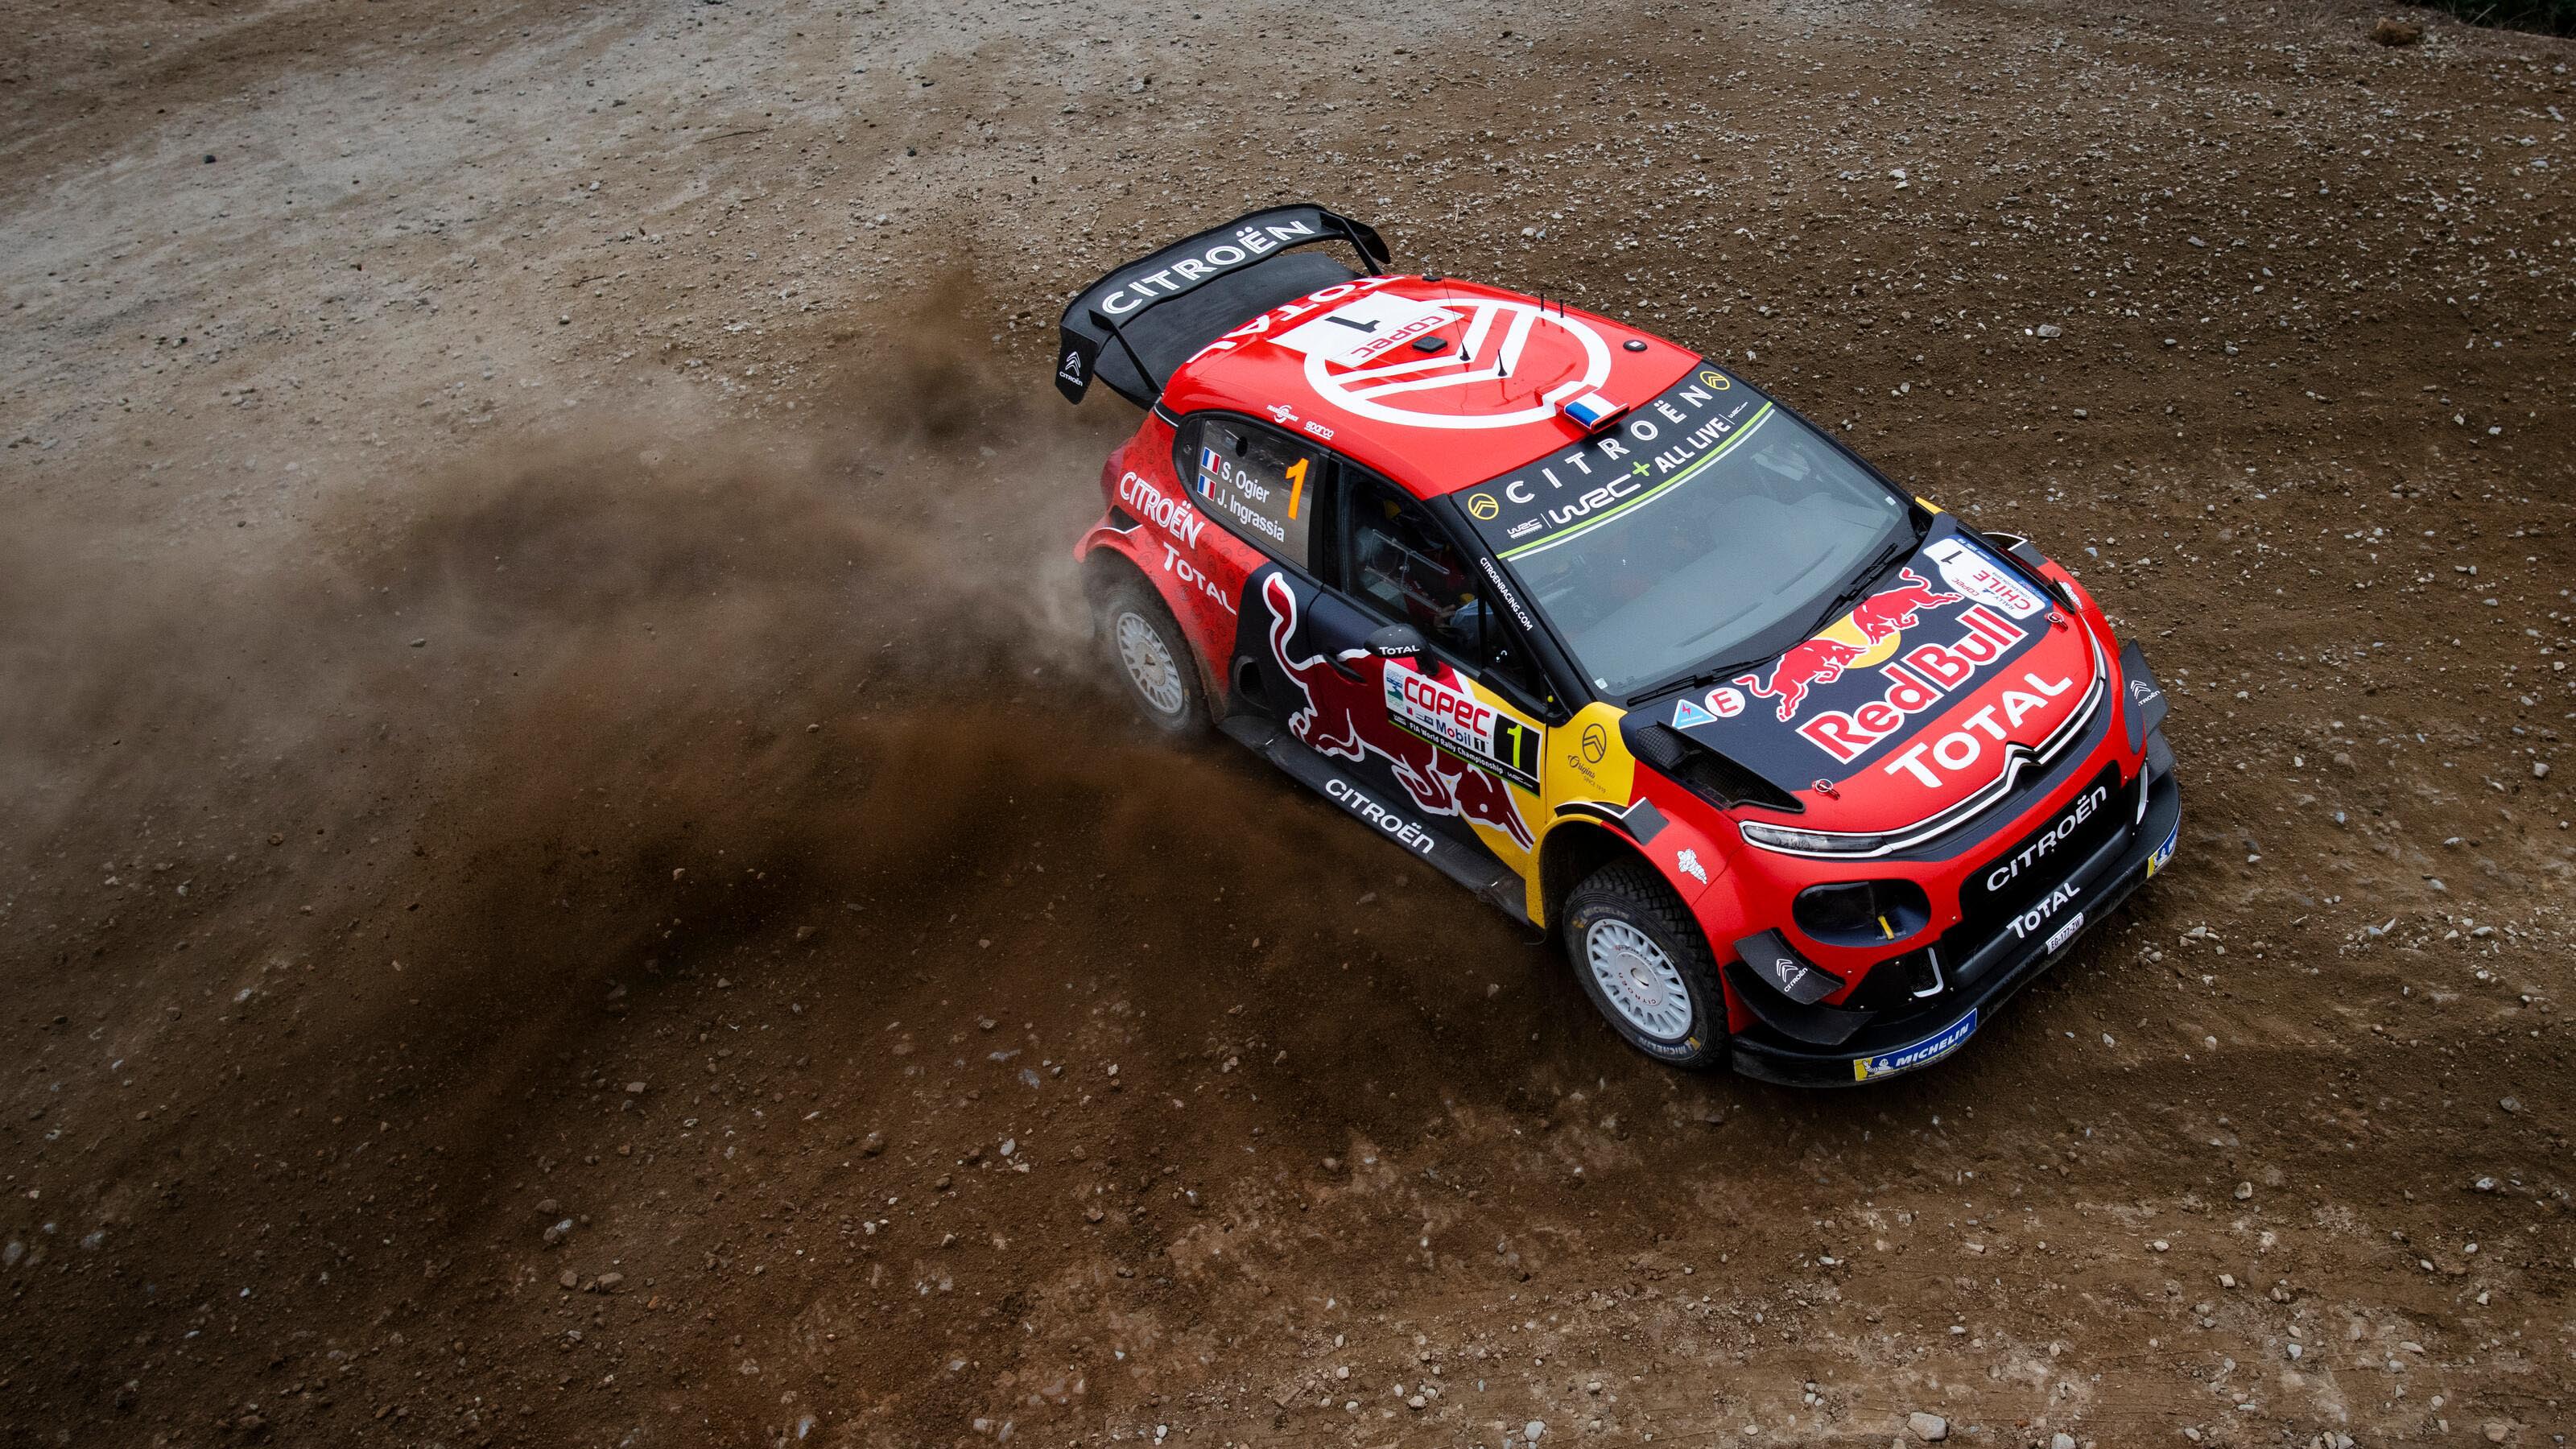 Sebastien-Ogier-will-be-chasing-a-record-sixth-win-in-Portugal-this-weekend